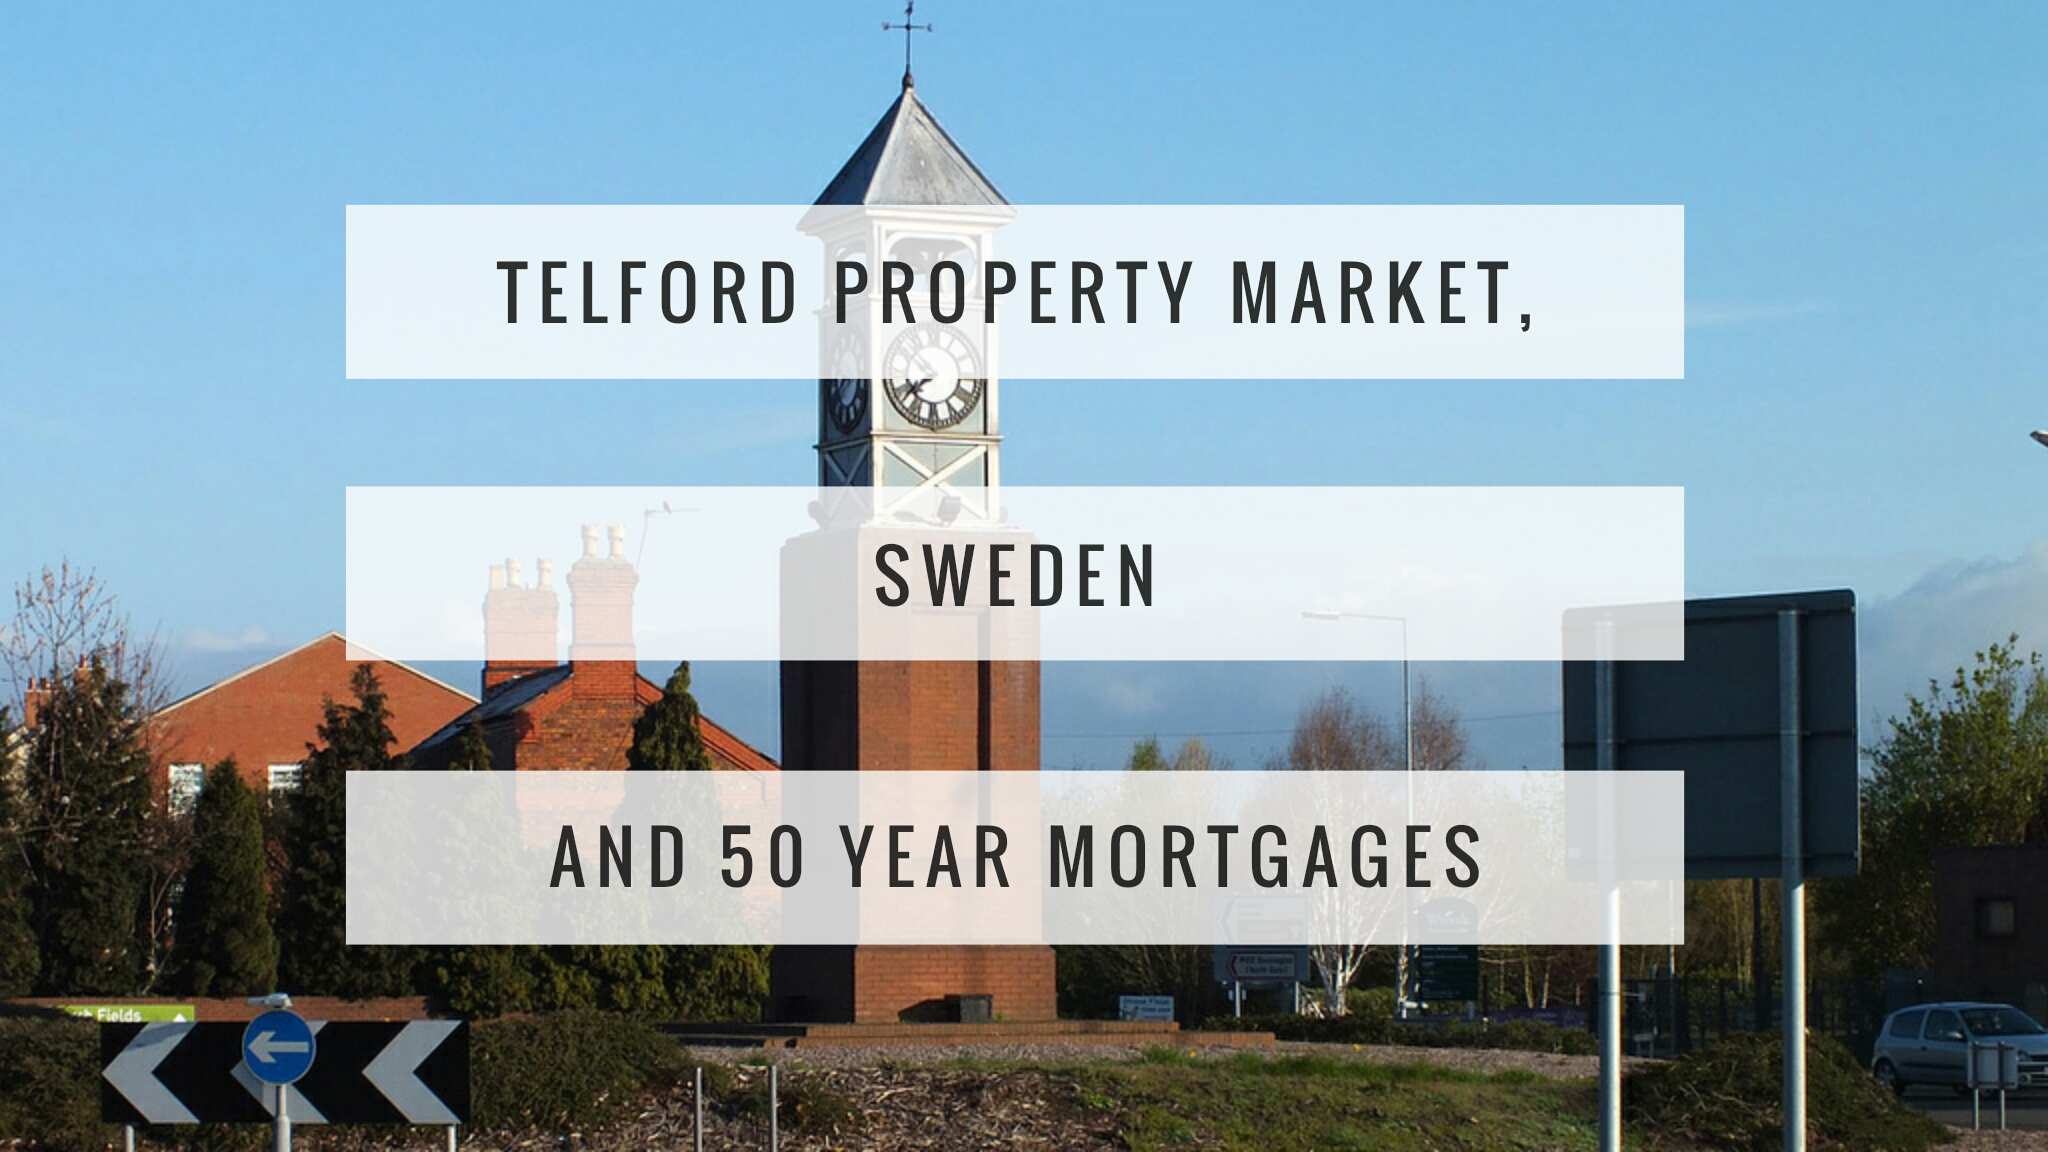 The Telford Property Market, Sweden and 50 year mortgages